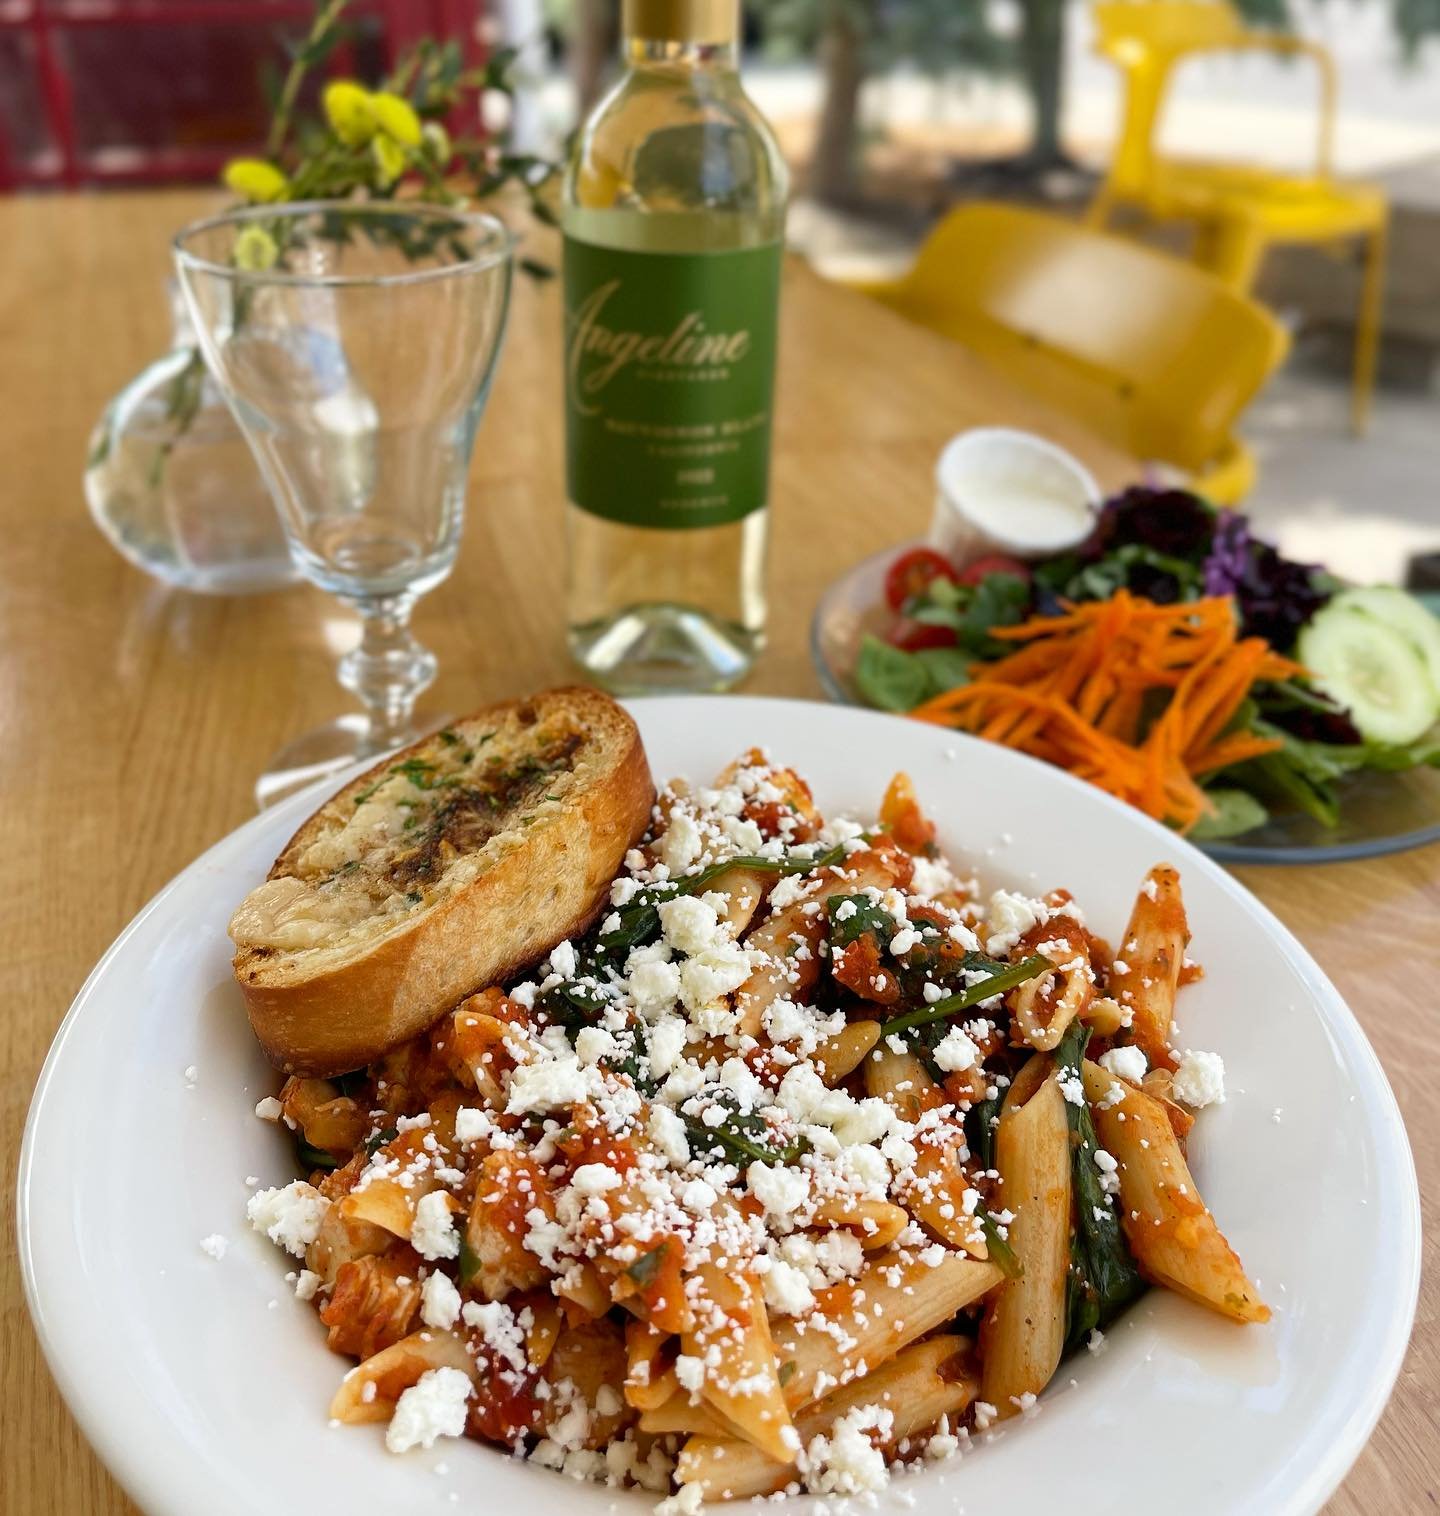 Stop by for Dinner - our Pasta Athena will hit the spot.